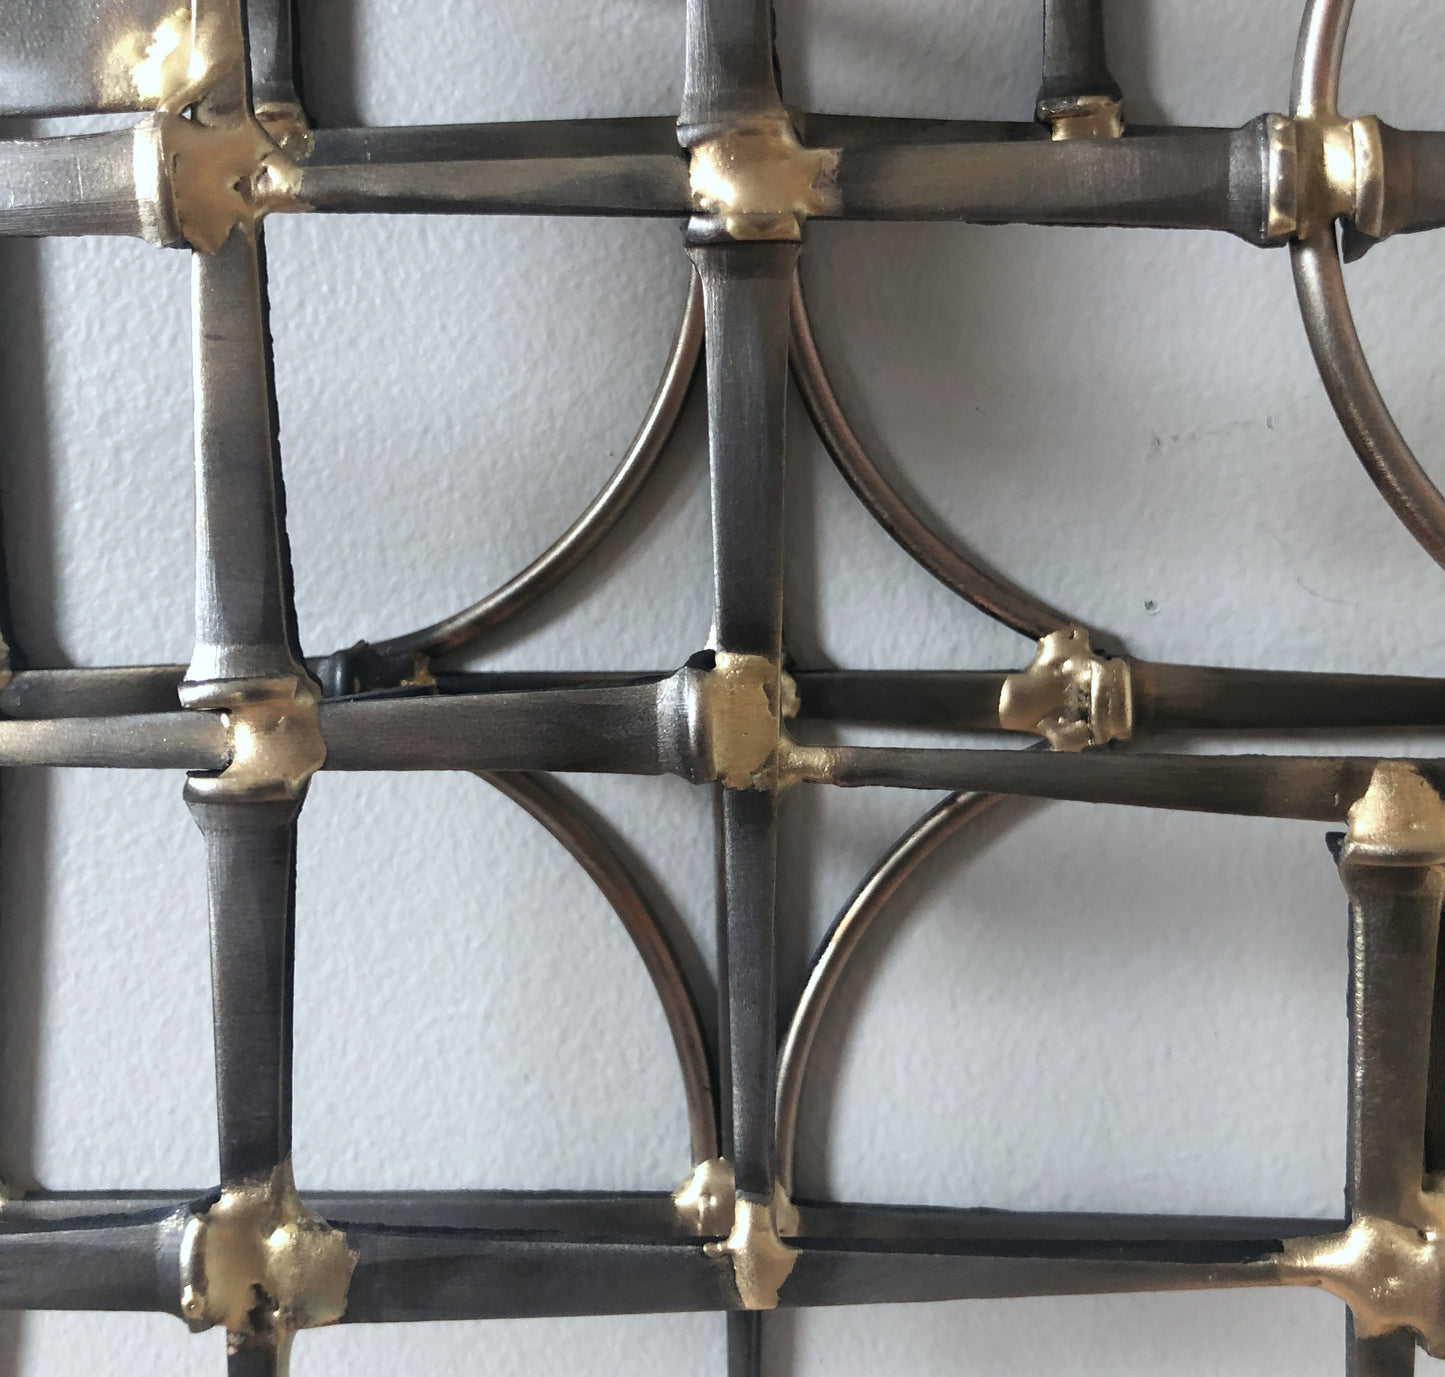 Around and About - Metal Wall Sculpture - Brutalist Mid-Century style - wall mount or free standing